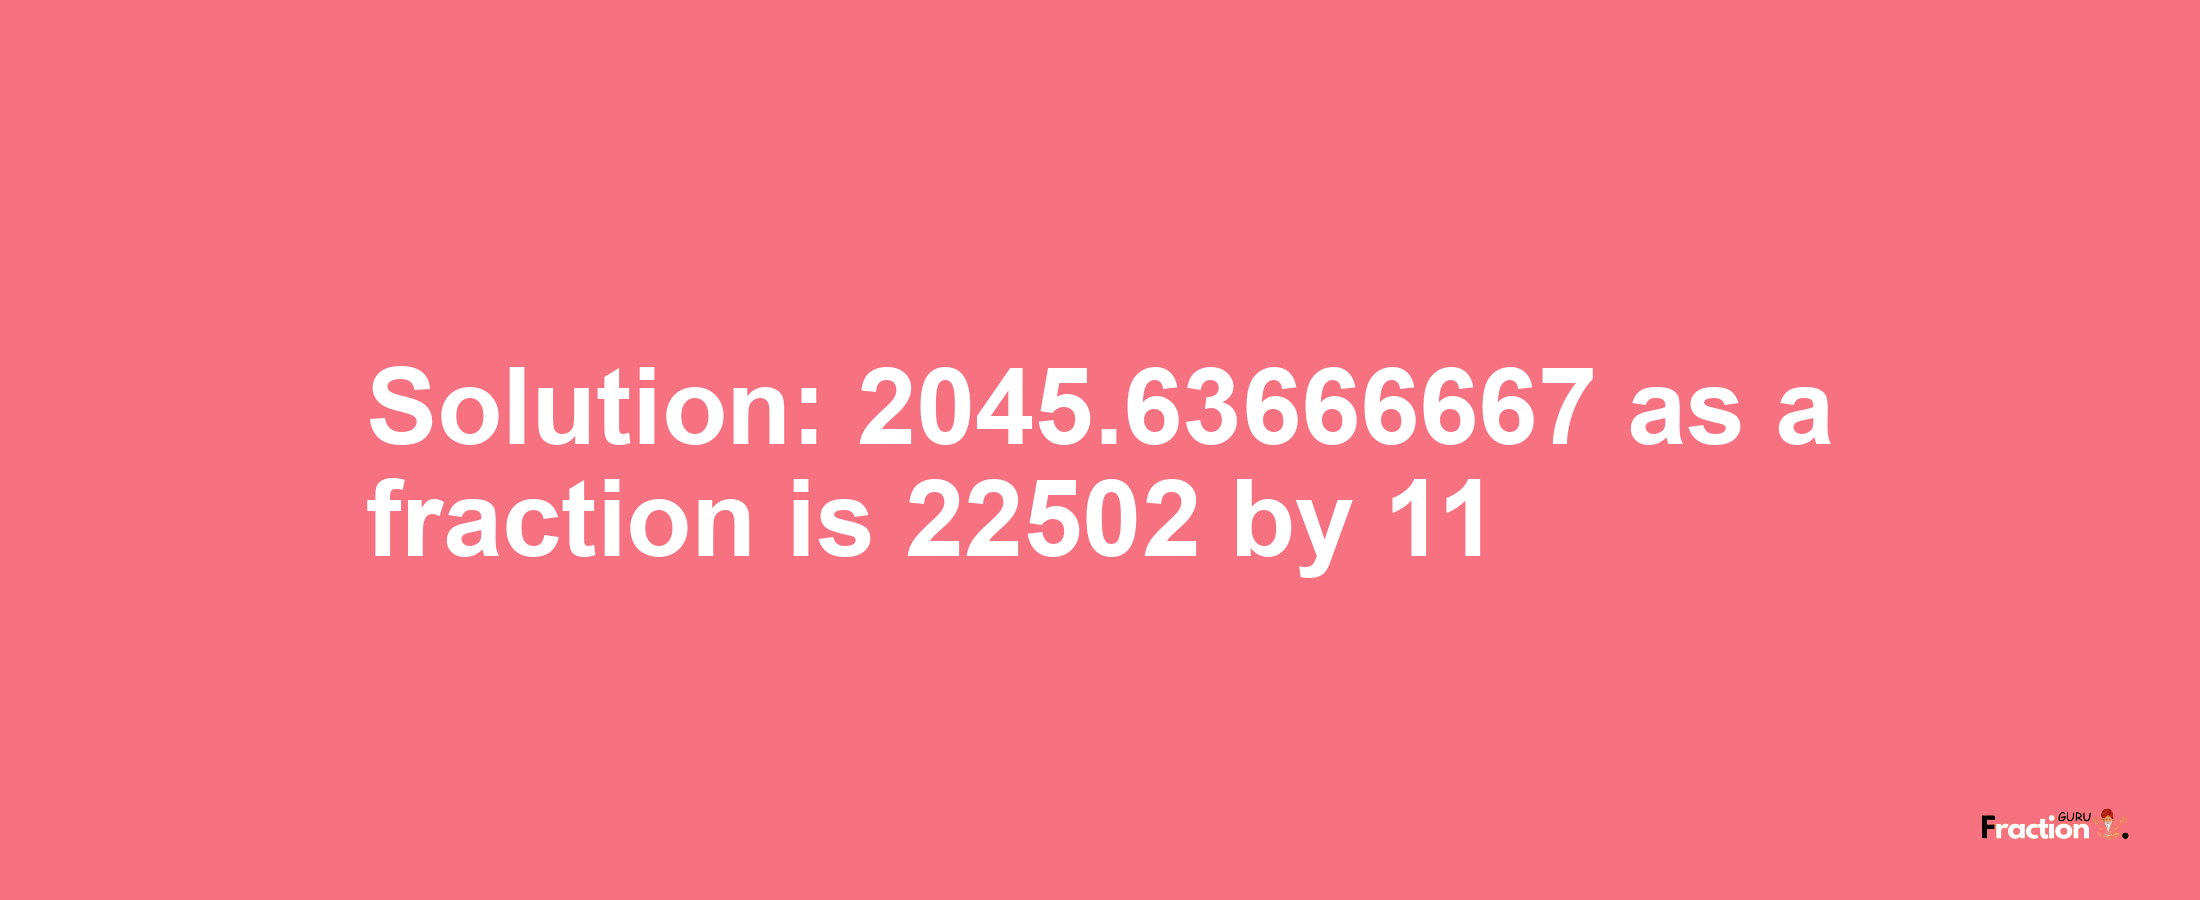 Solution:2045.63666667 as a fraction is 22502/11